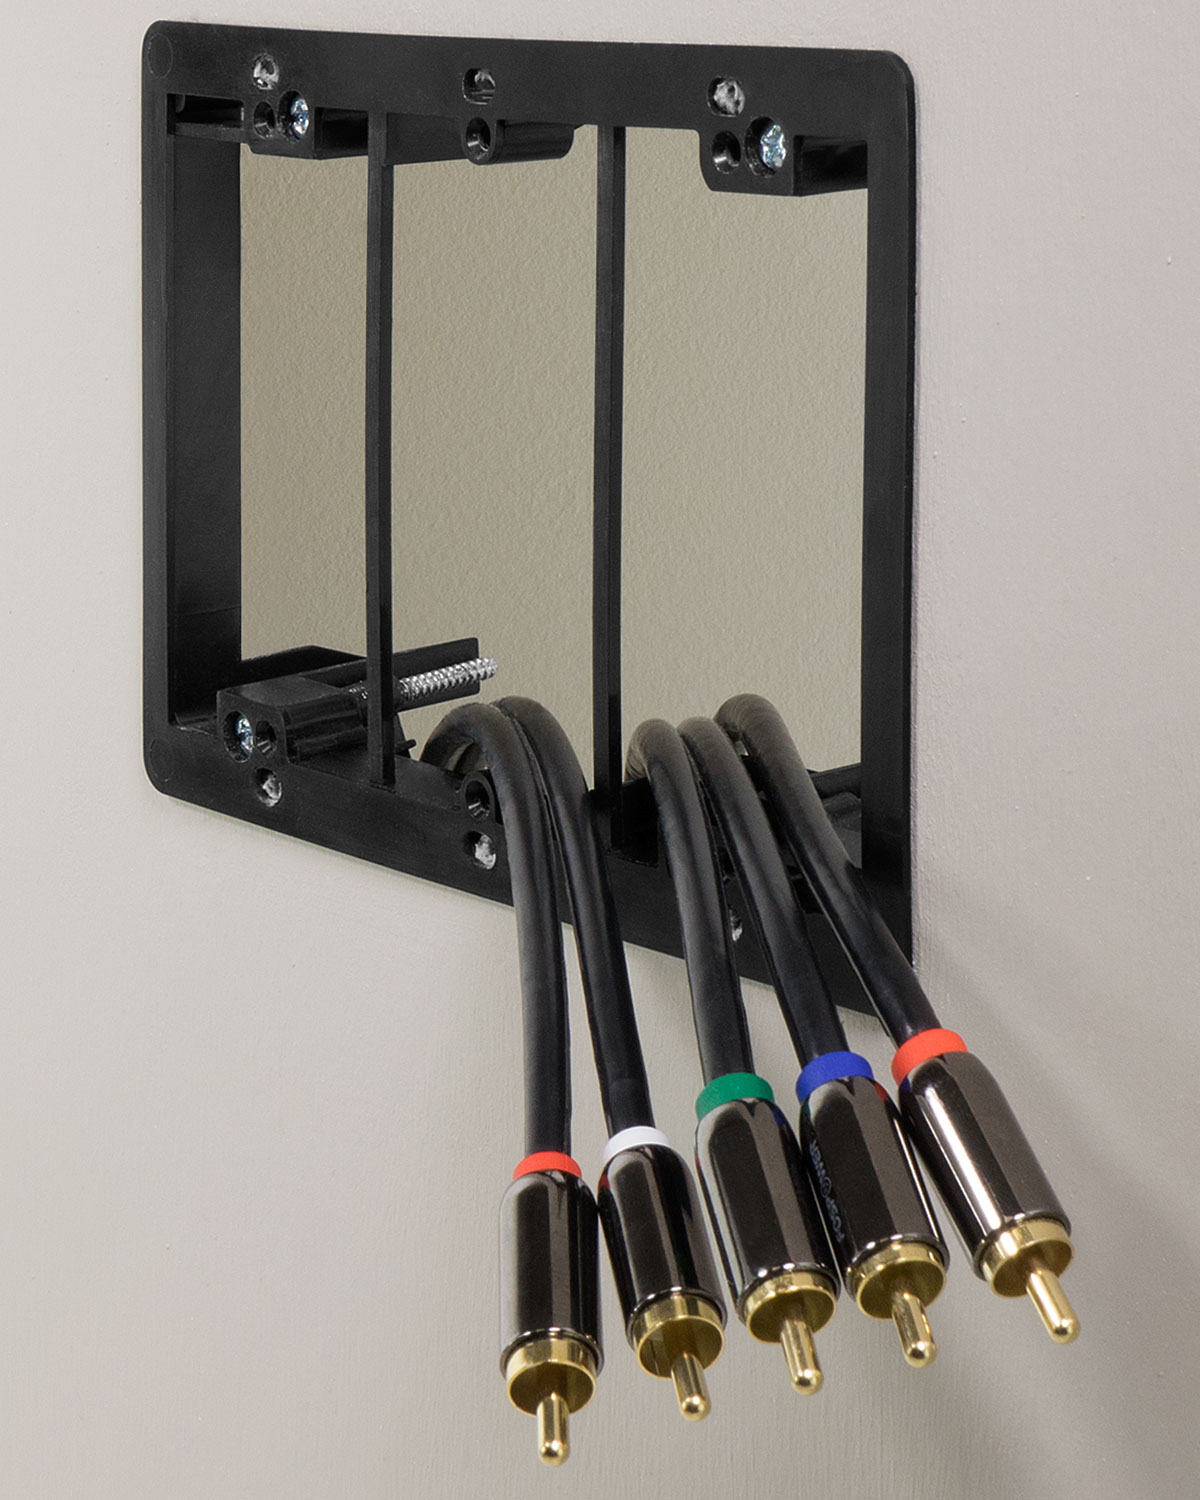 Low Voltage Mounting Bracket (3 Gang - 5 Packs), Fosmon Low Voltage Mounting Bracket (Mounting Screws Included) for Telephone Wires, Network Cables, HDMI, Coaxial, and Speaker Cables - image 3 of 4